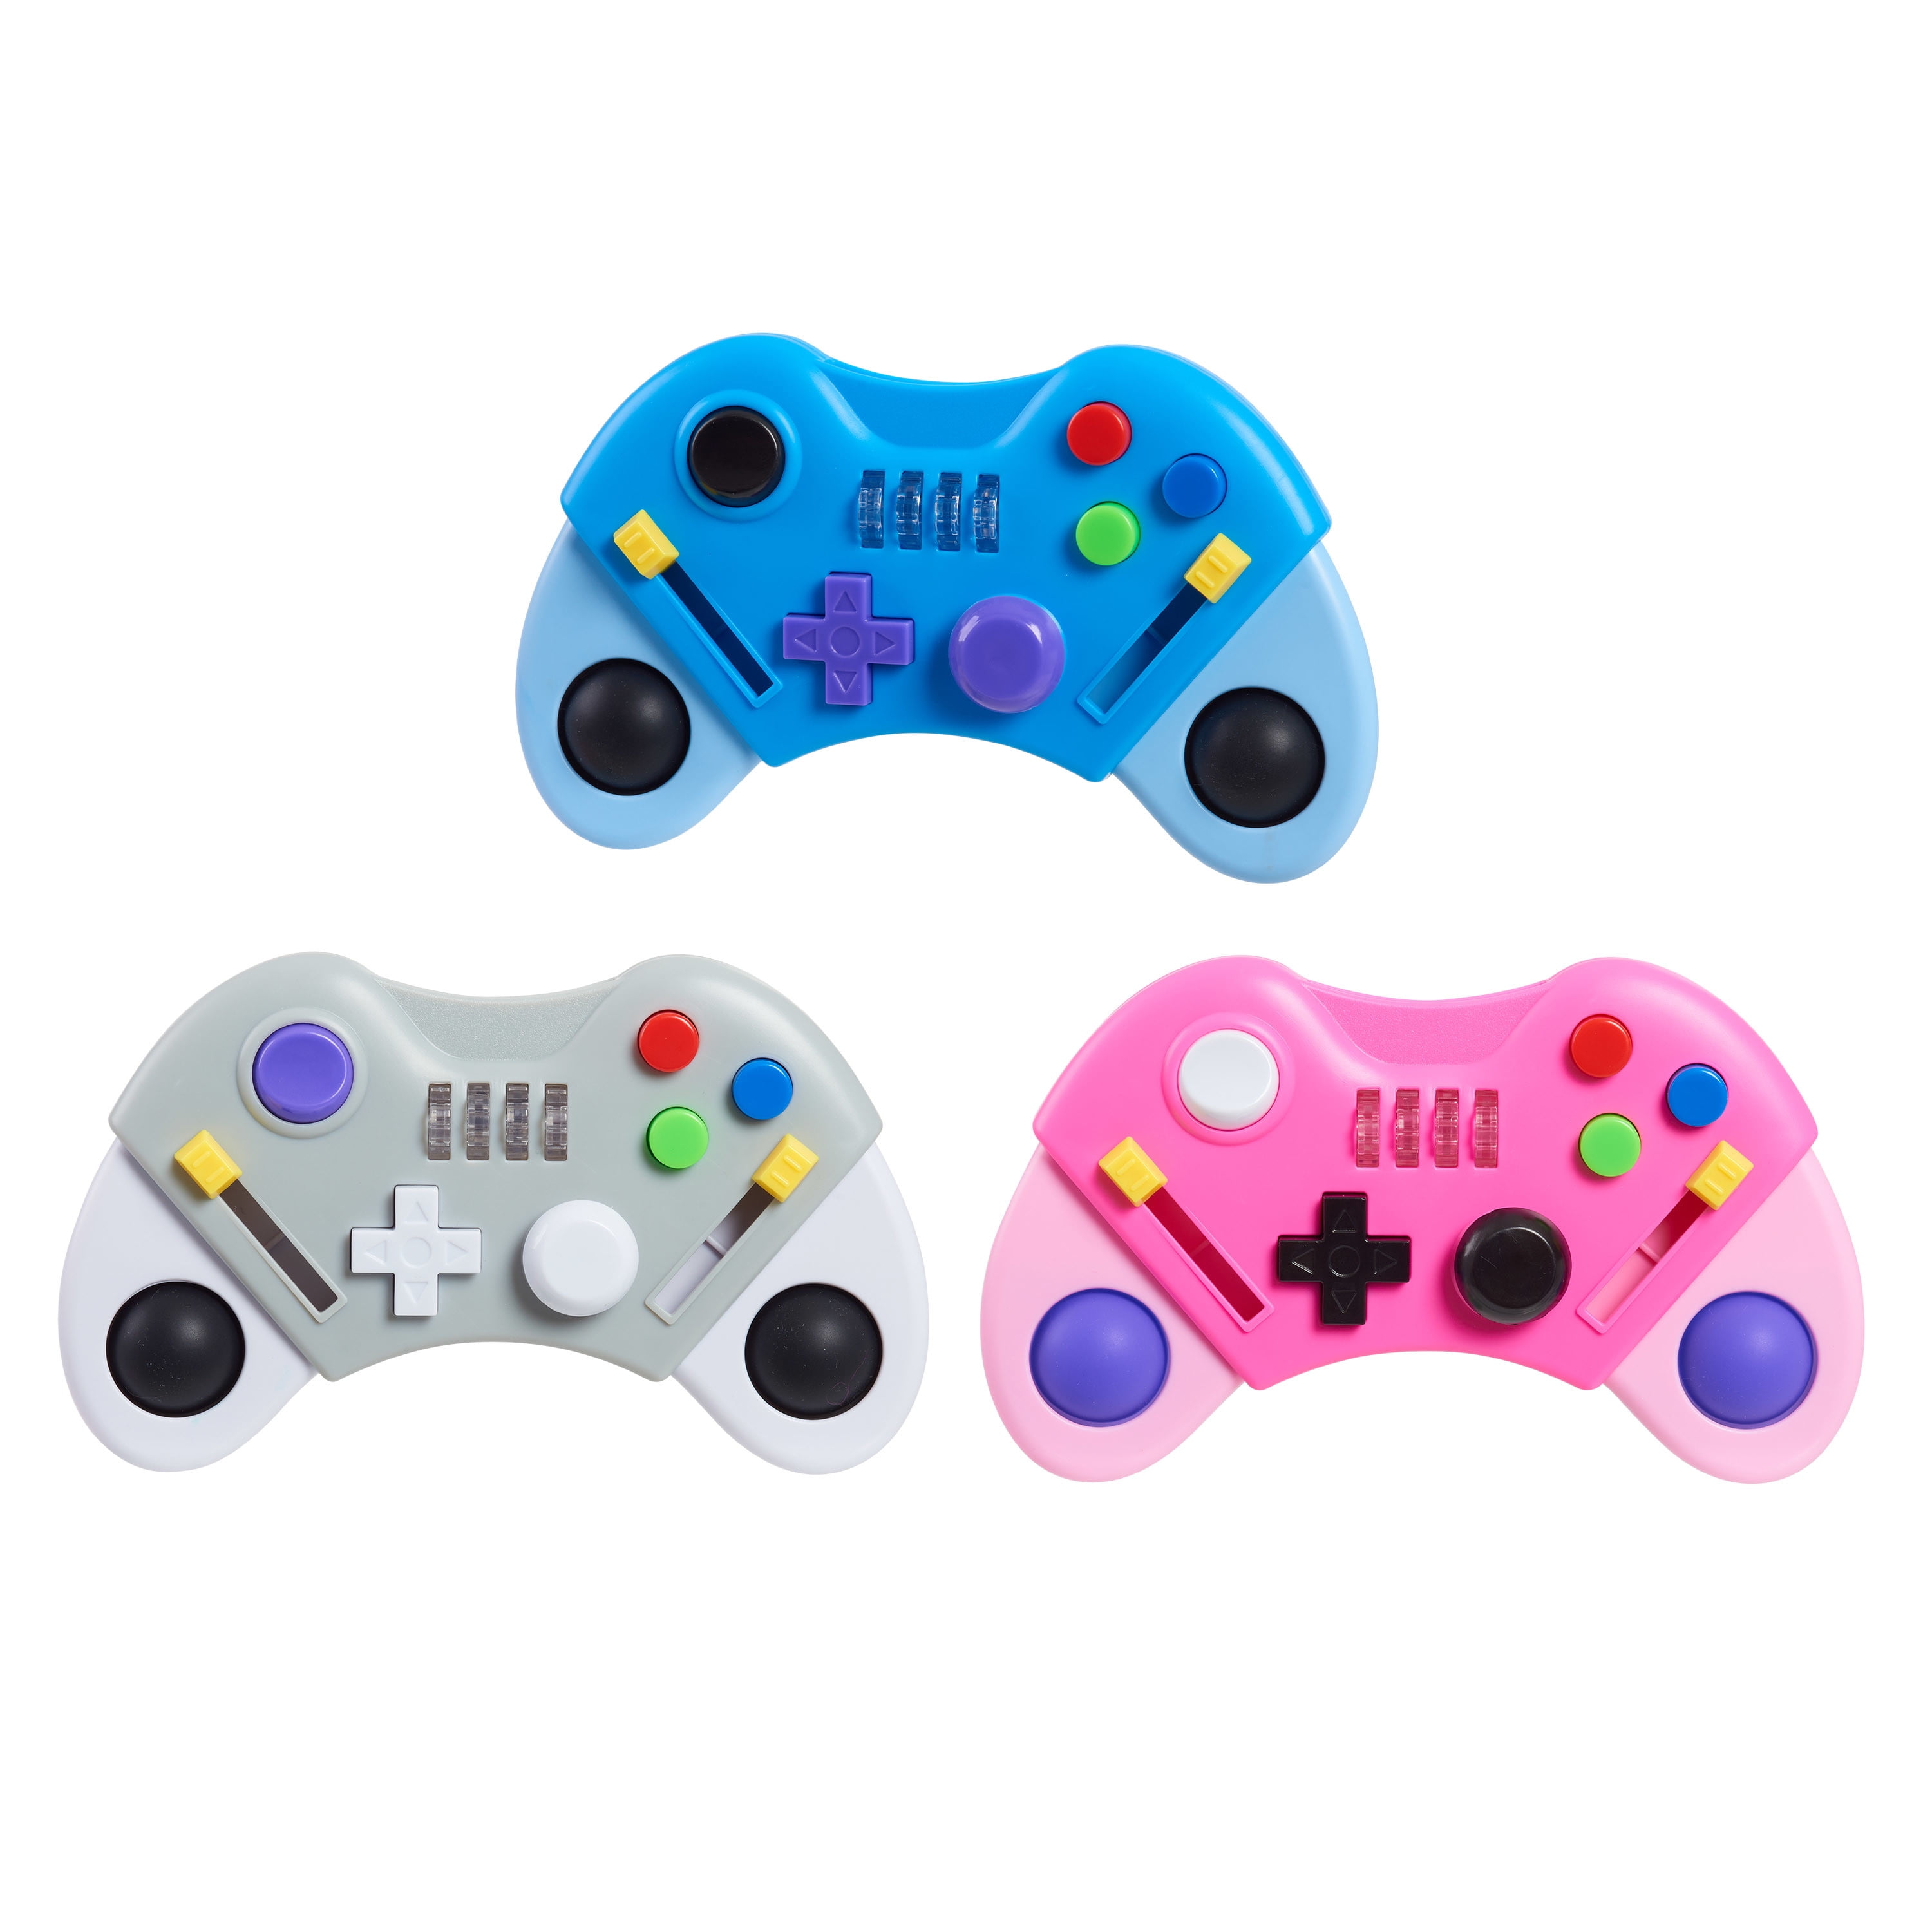 Fidgetz Game Controller, Kids Toys for Ages 3 up